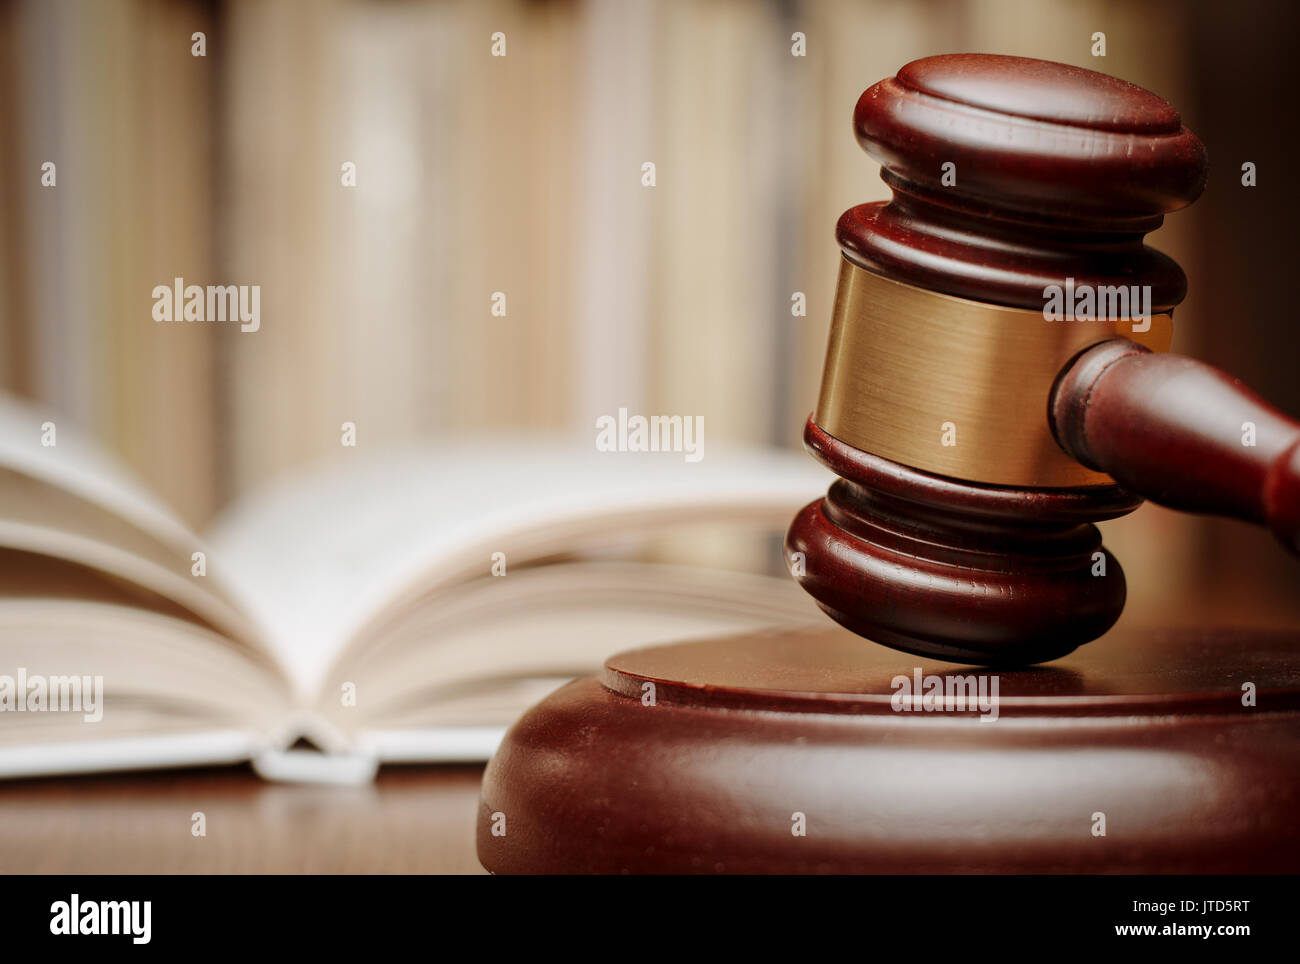 Wooden gavel resting on its end on a wooden table in front of an open law book conceptual of a judge, courtroom and judgements Stock Photo